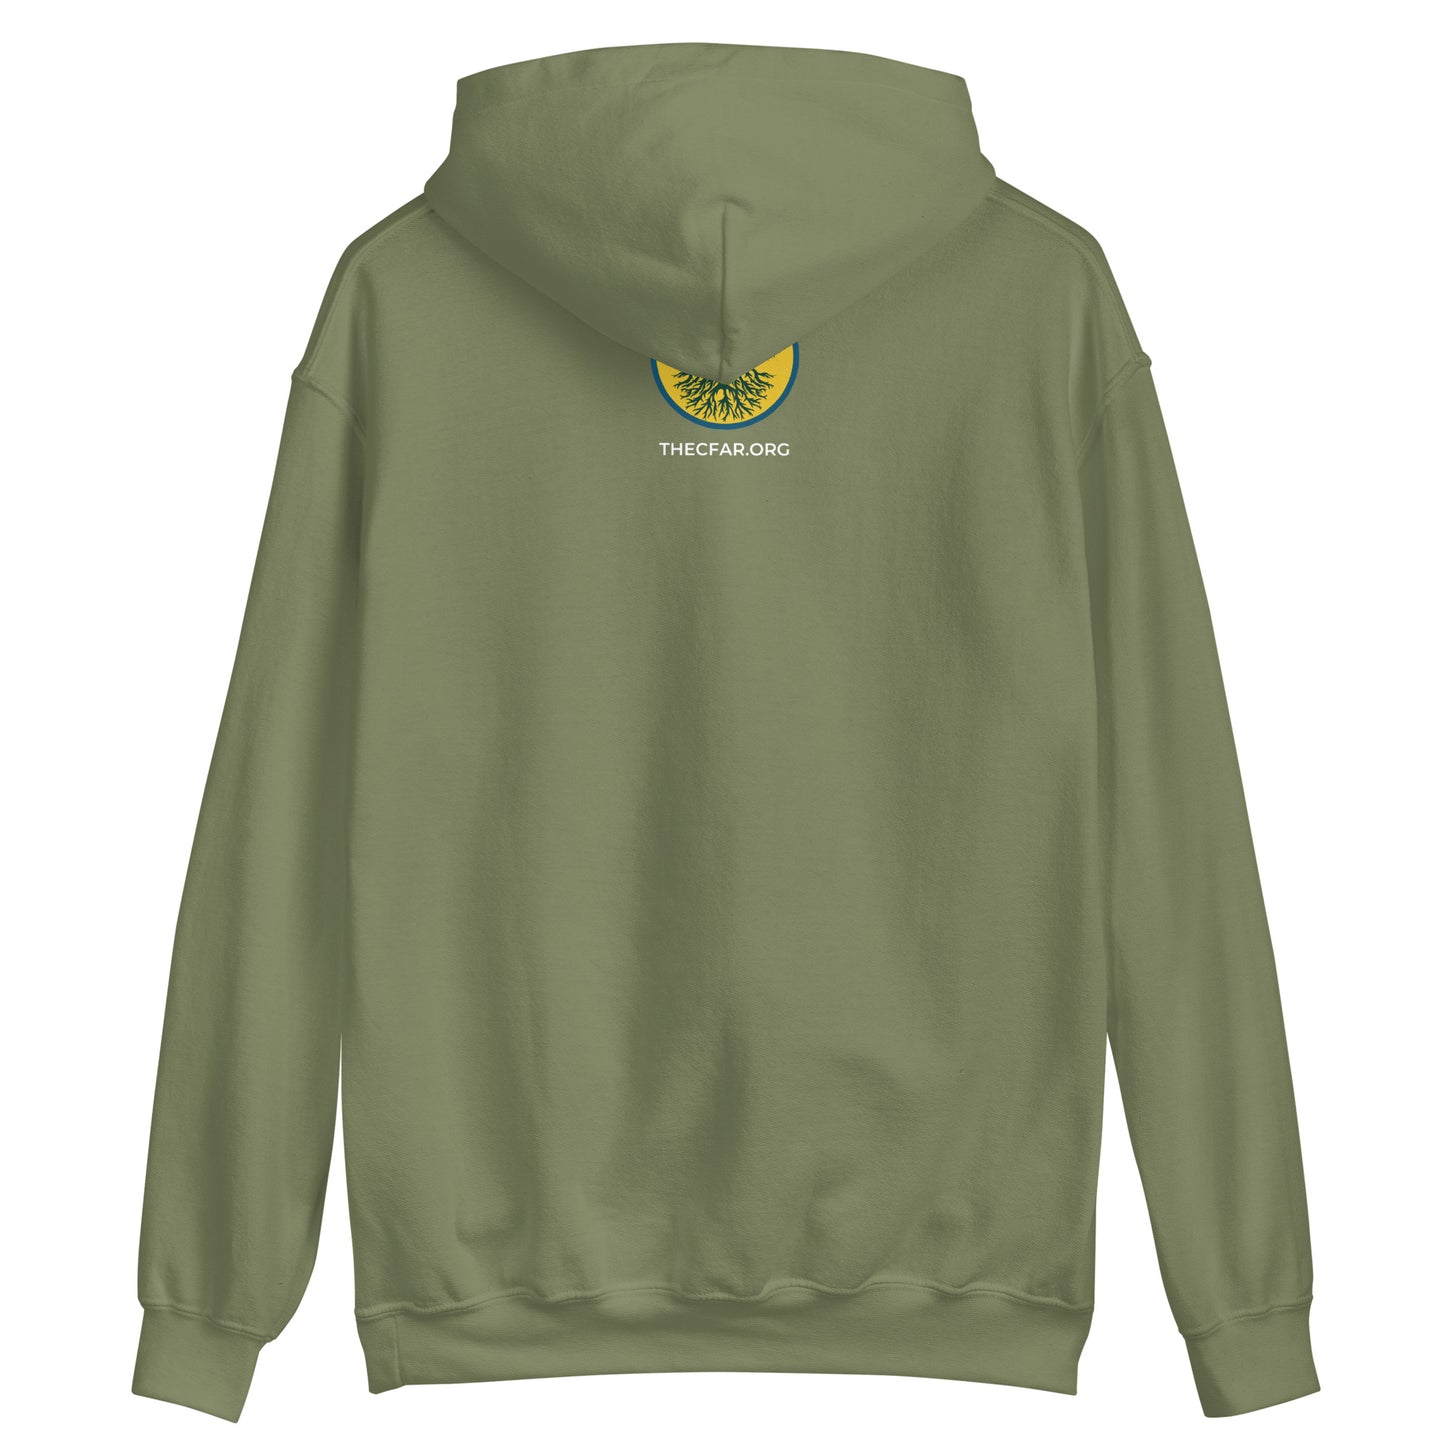 Rethinking Agriculture Hoodie